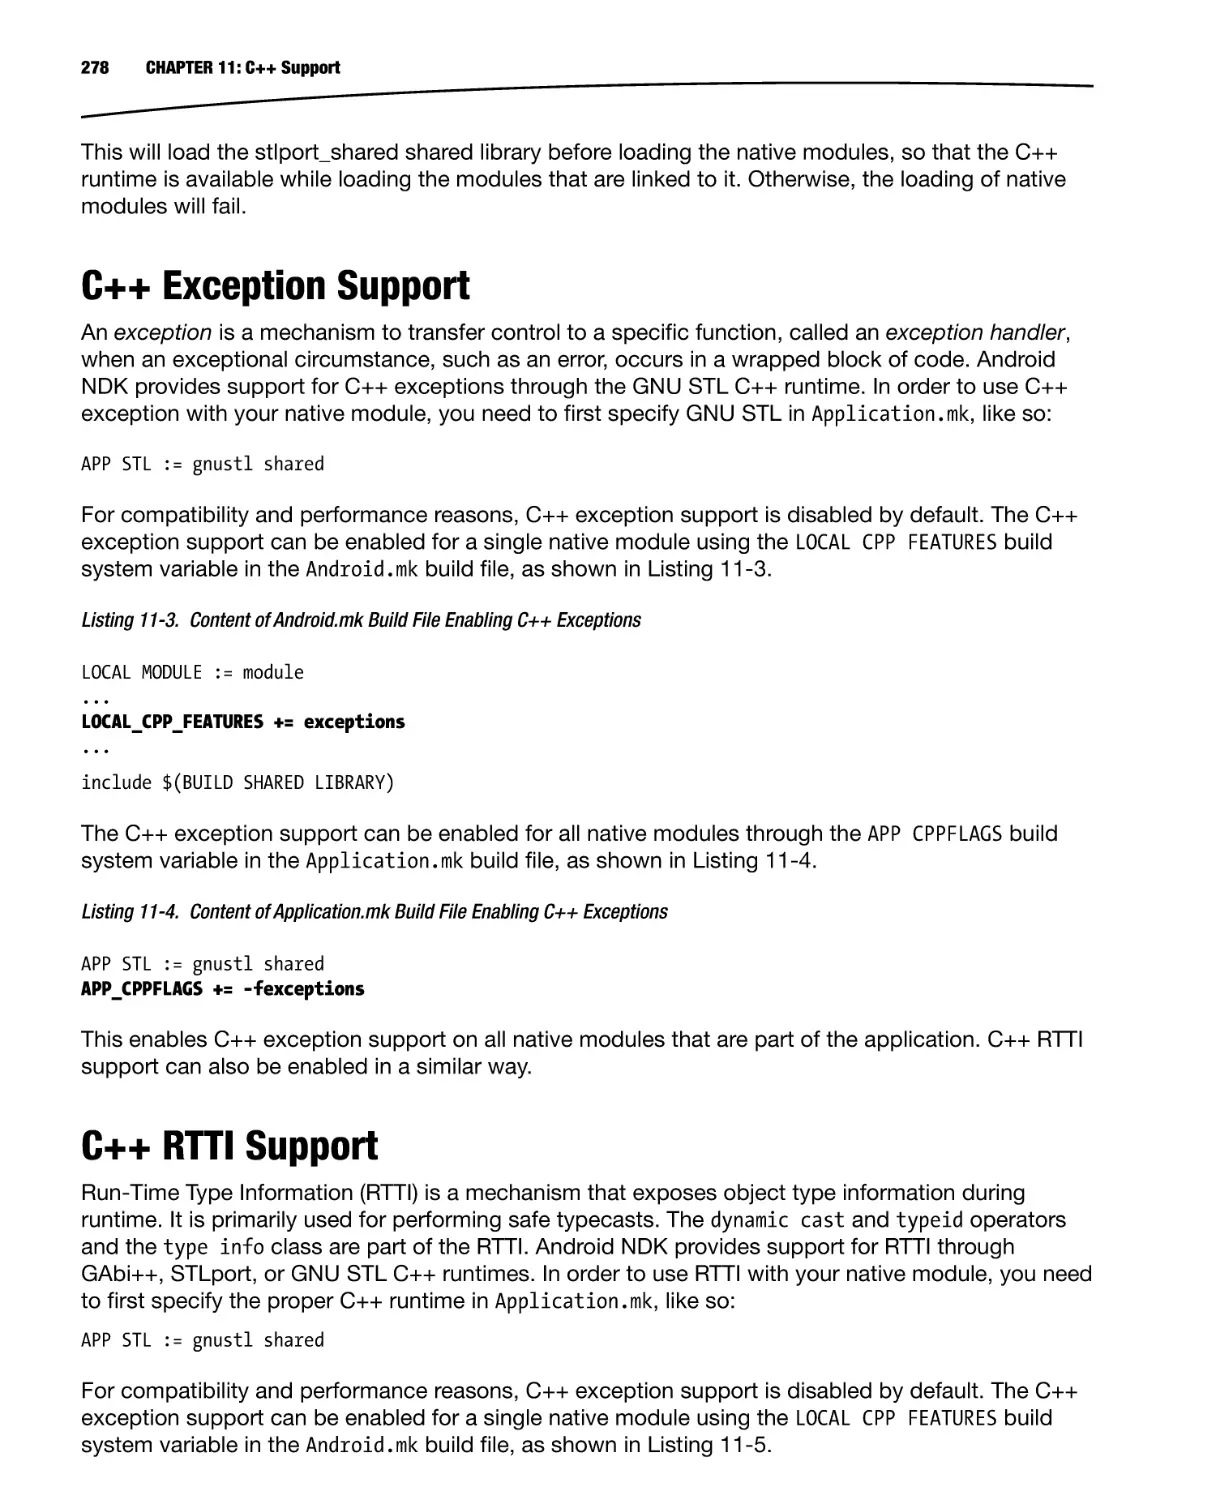 C++ Exception Support
C++ RTTI Support